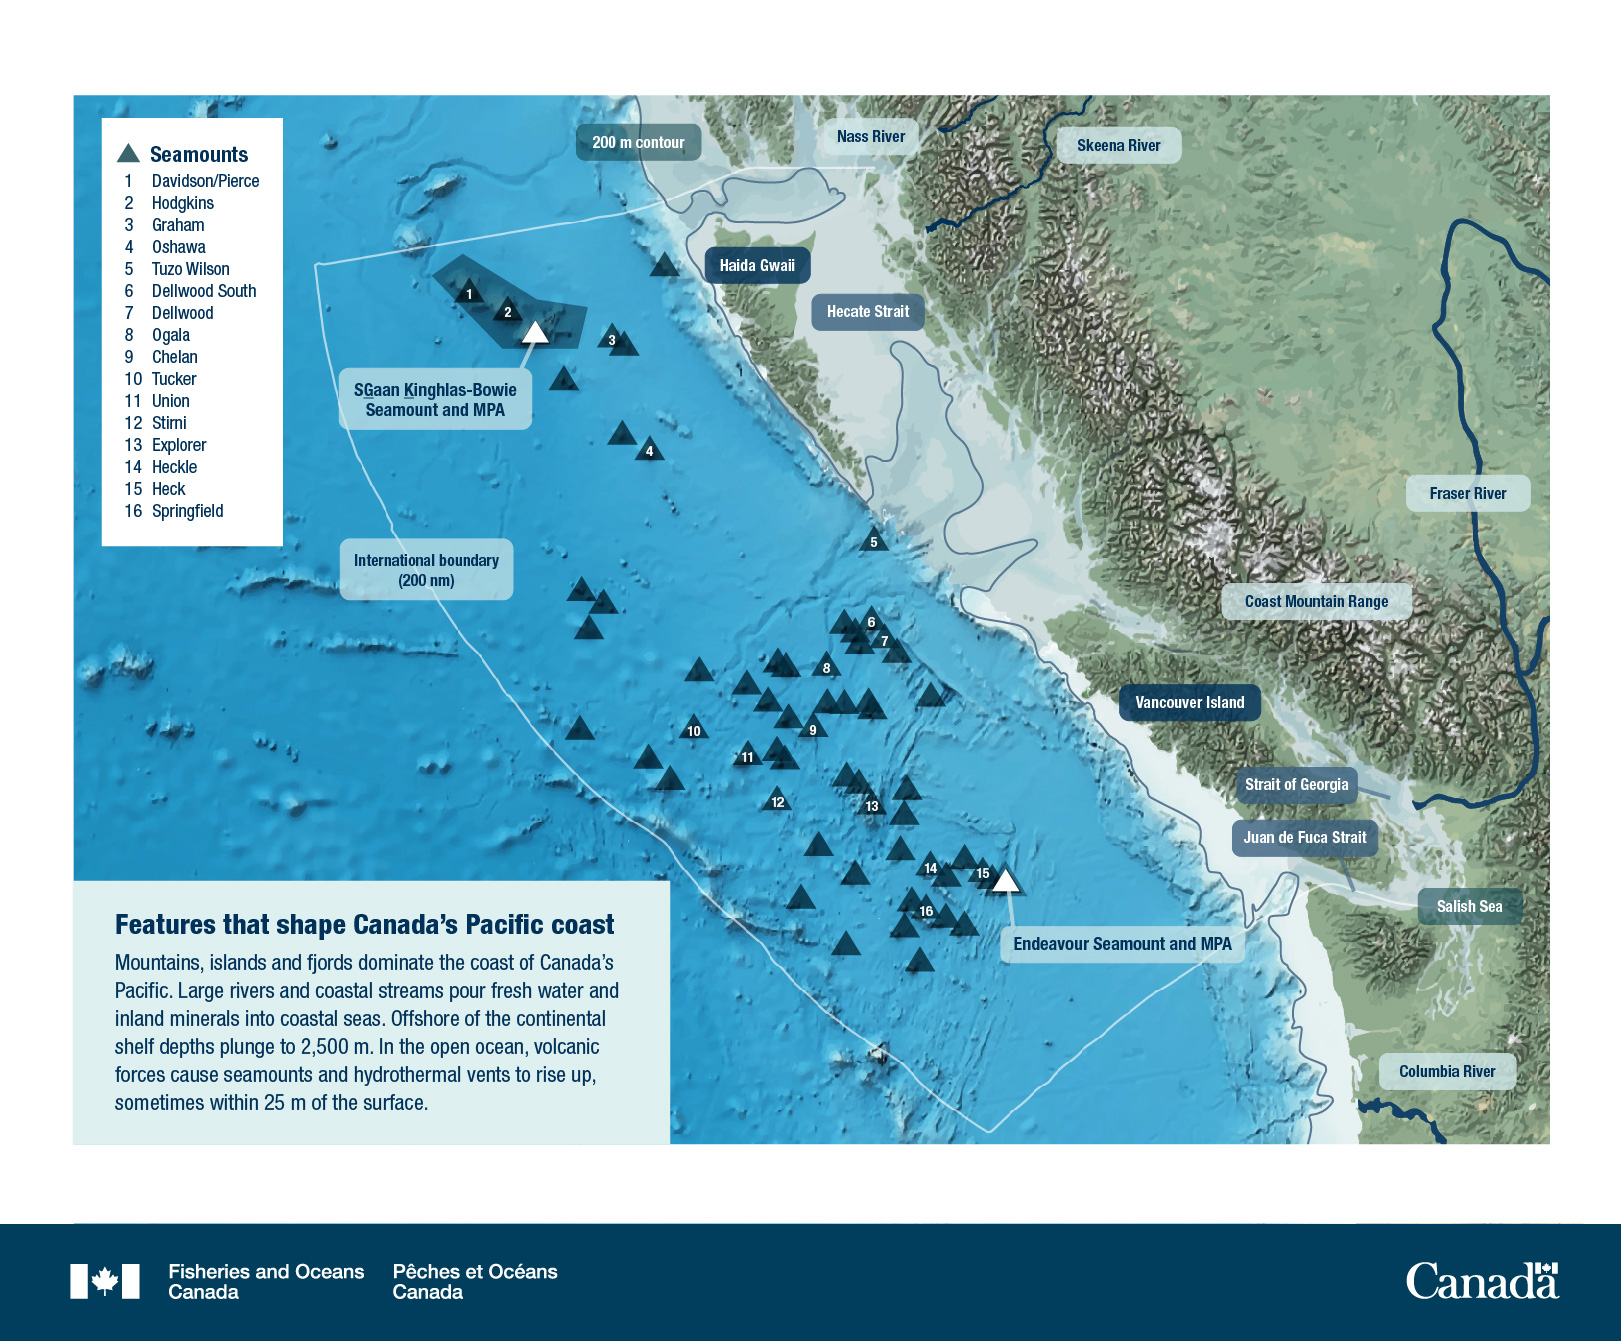 Features that shape Canada’s Pacific coast